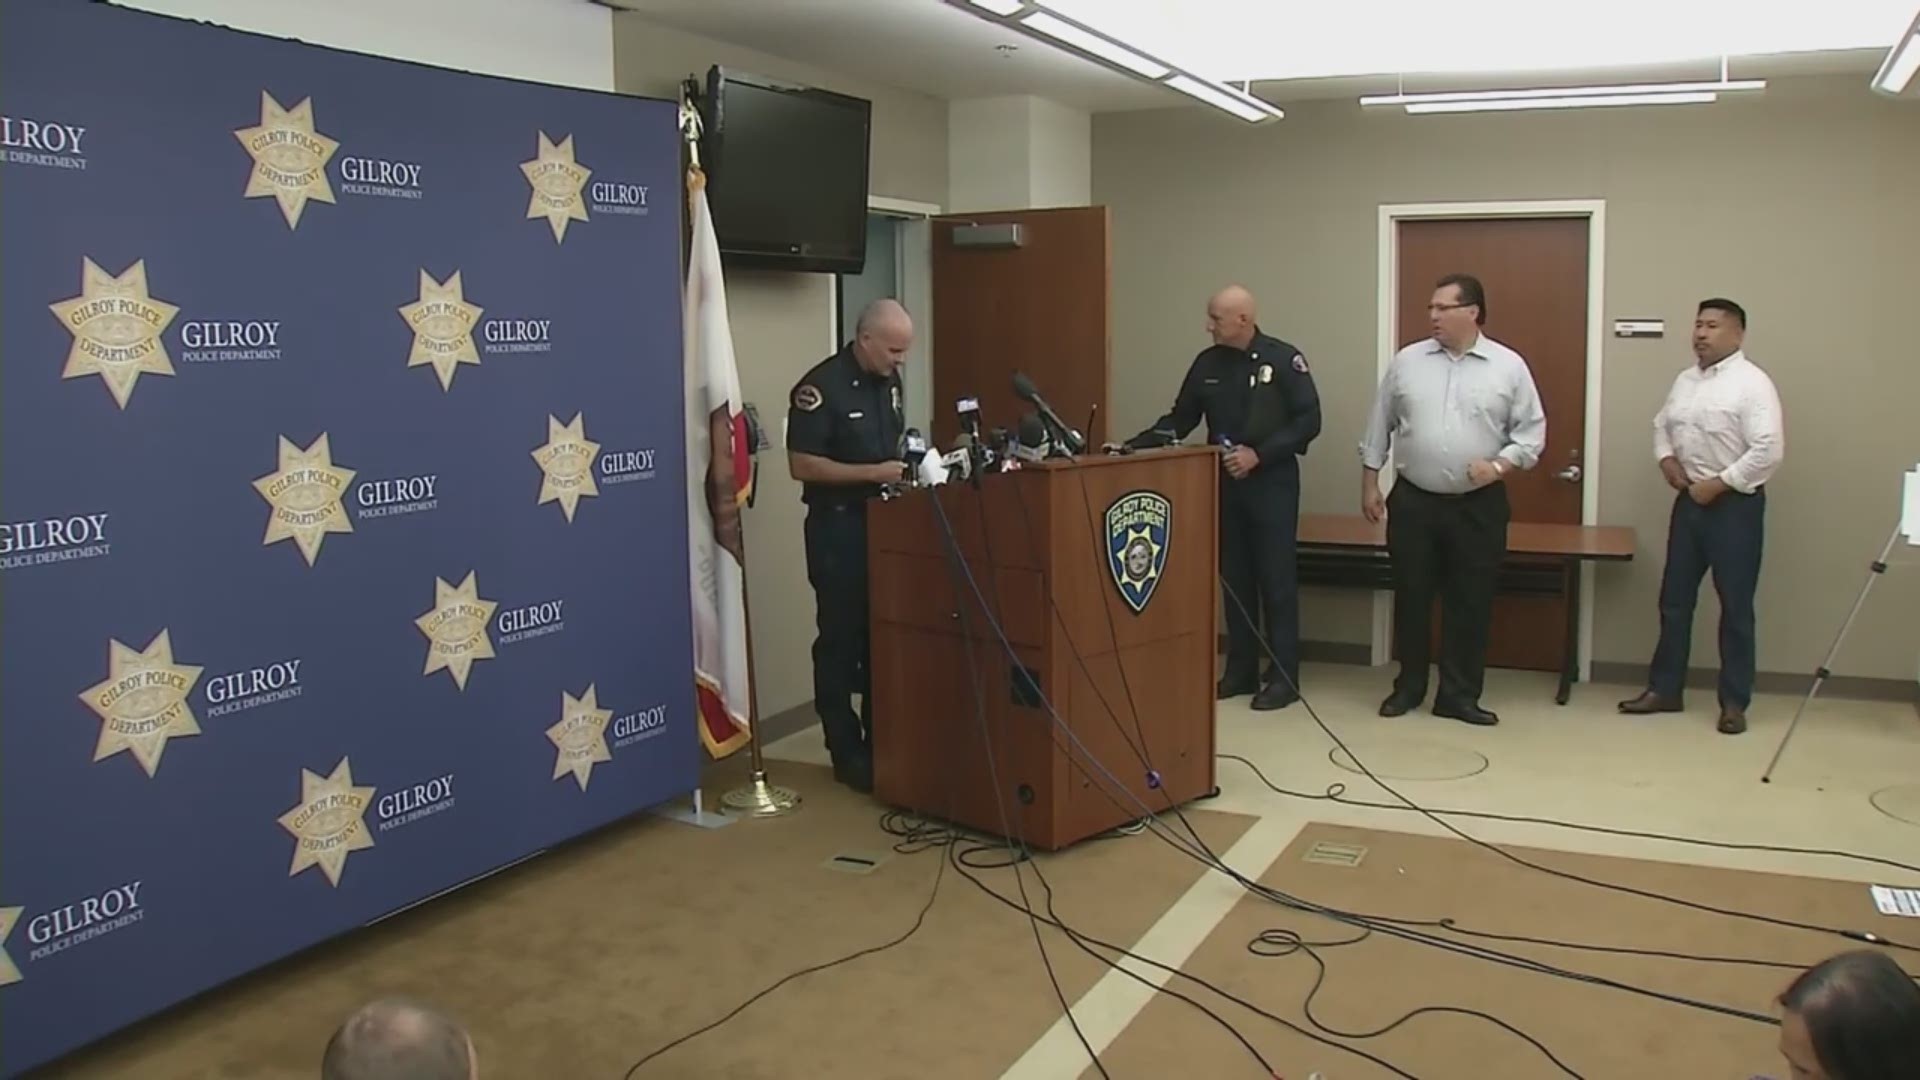 The Gilroy Police Department provides an update on the latest details from the Gilroy Garlic Festival shooting.